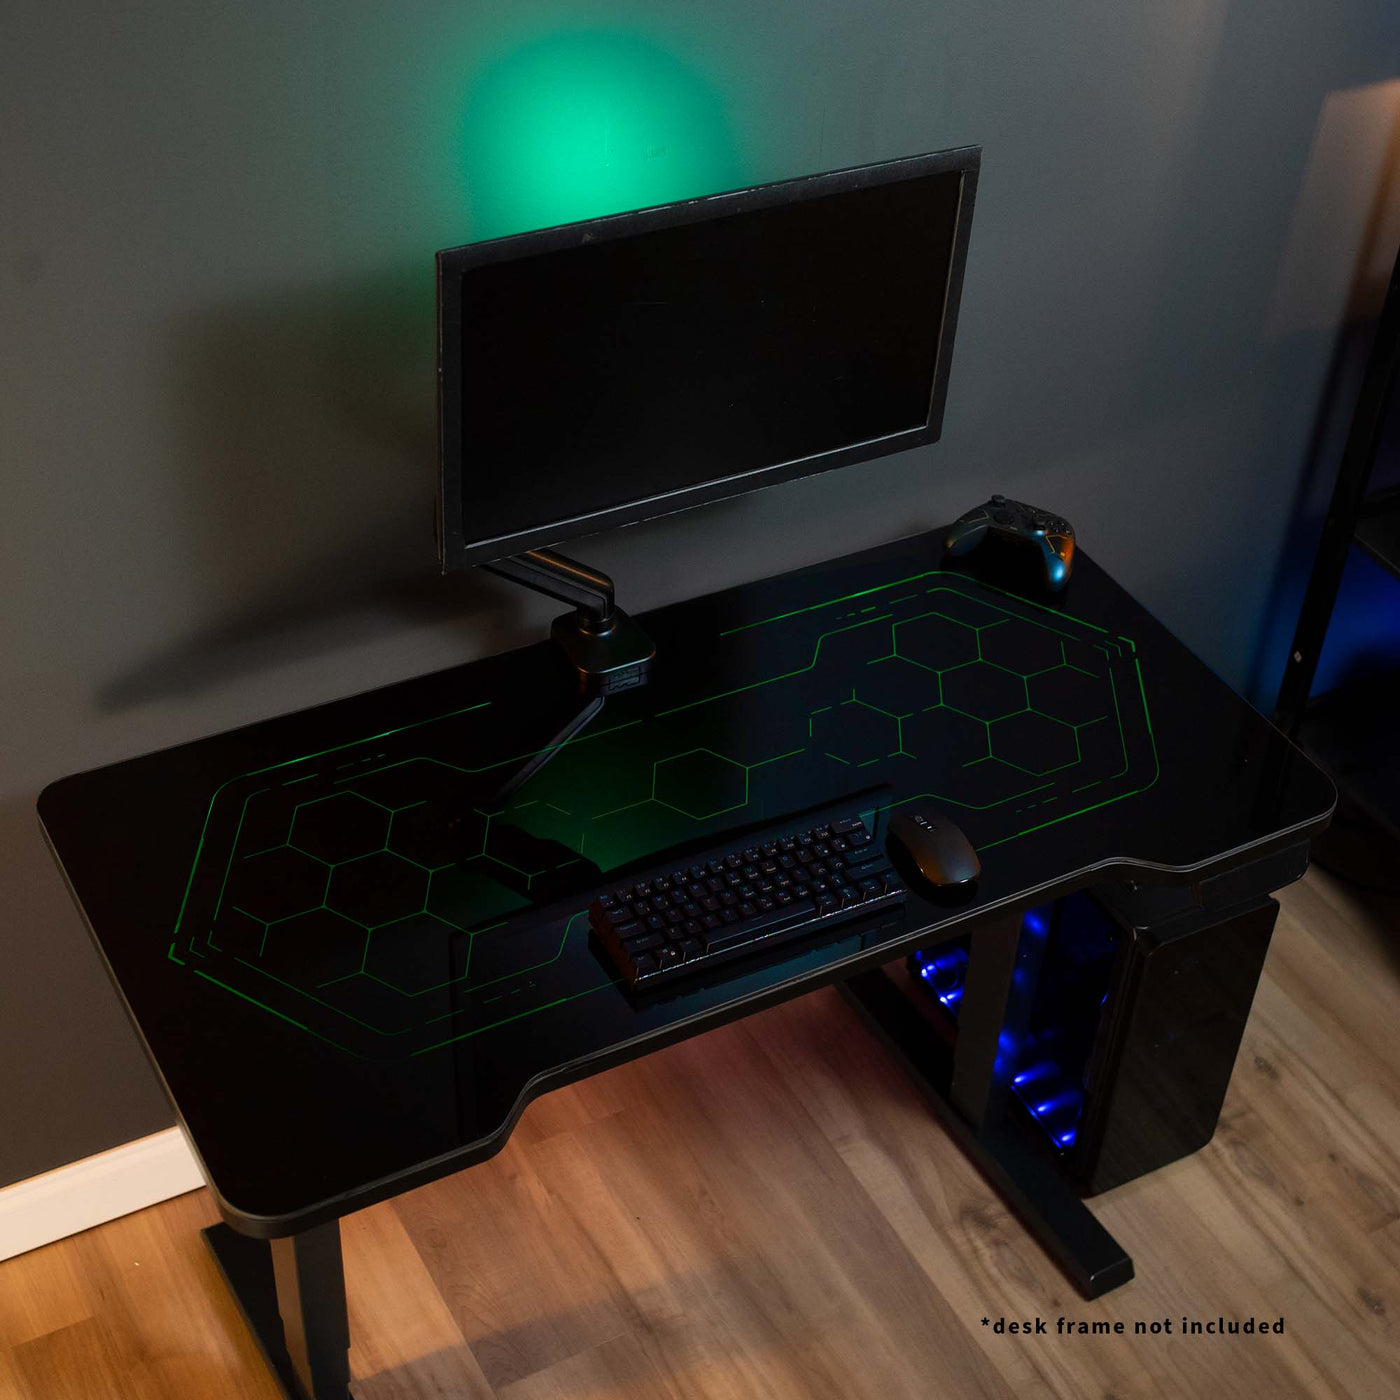 Sturdy RGB lighting gaming tabletop desktop with color changing remote controlled LED lights under tempered glass tabletop surface.